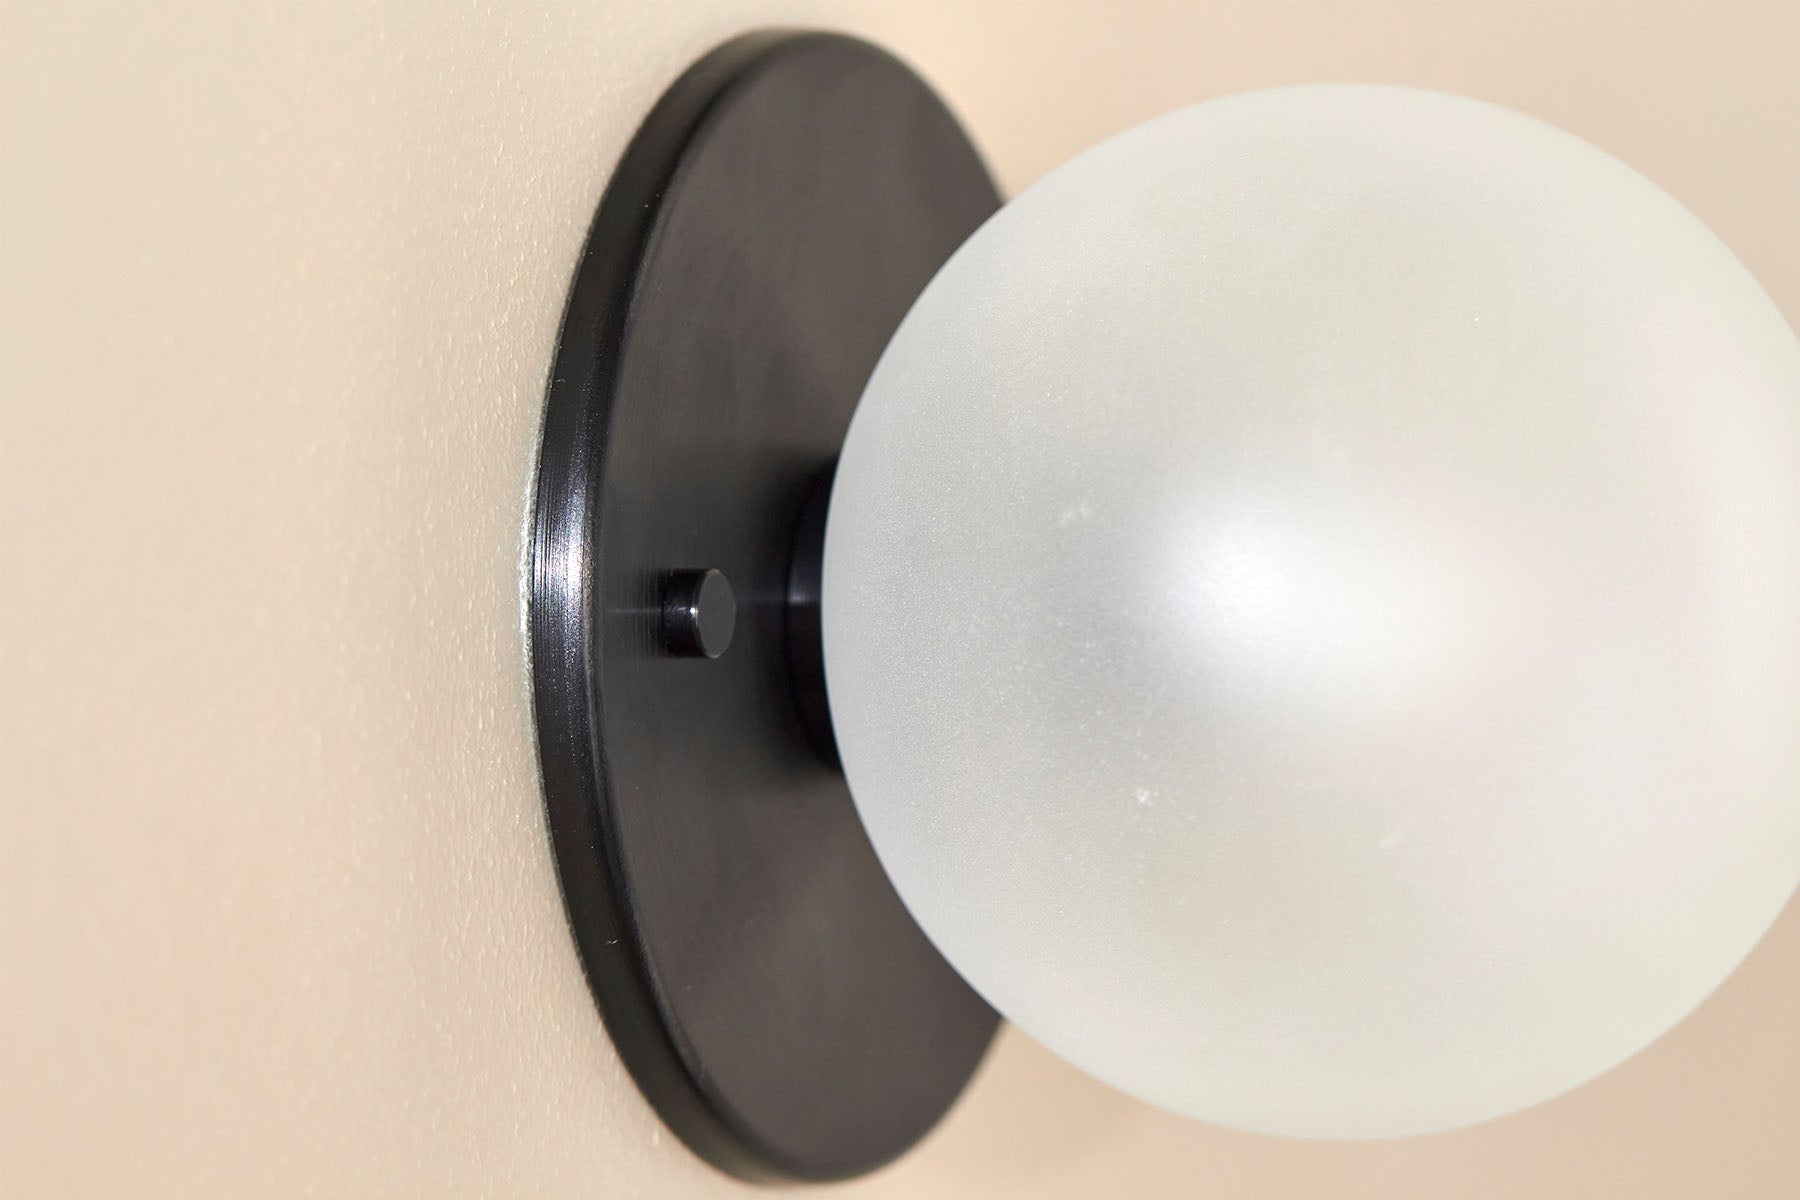 Orb Surface Sconce, Small in Brushed Black and Clear Frosted. Image by Lawrence Furzey.